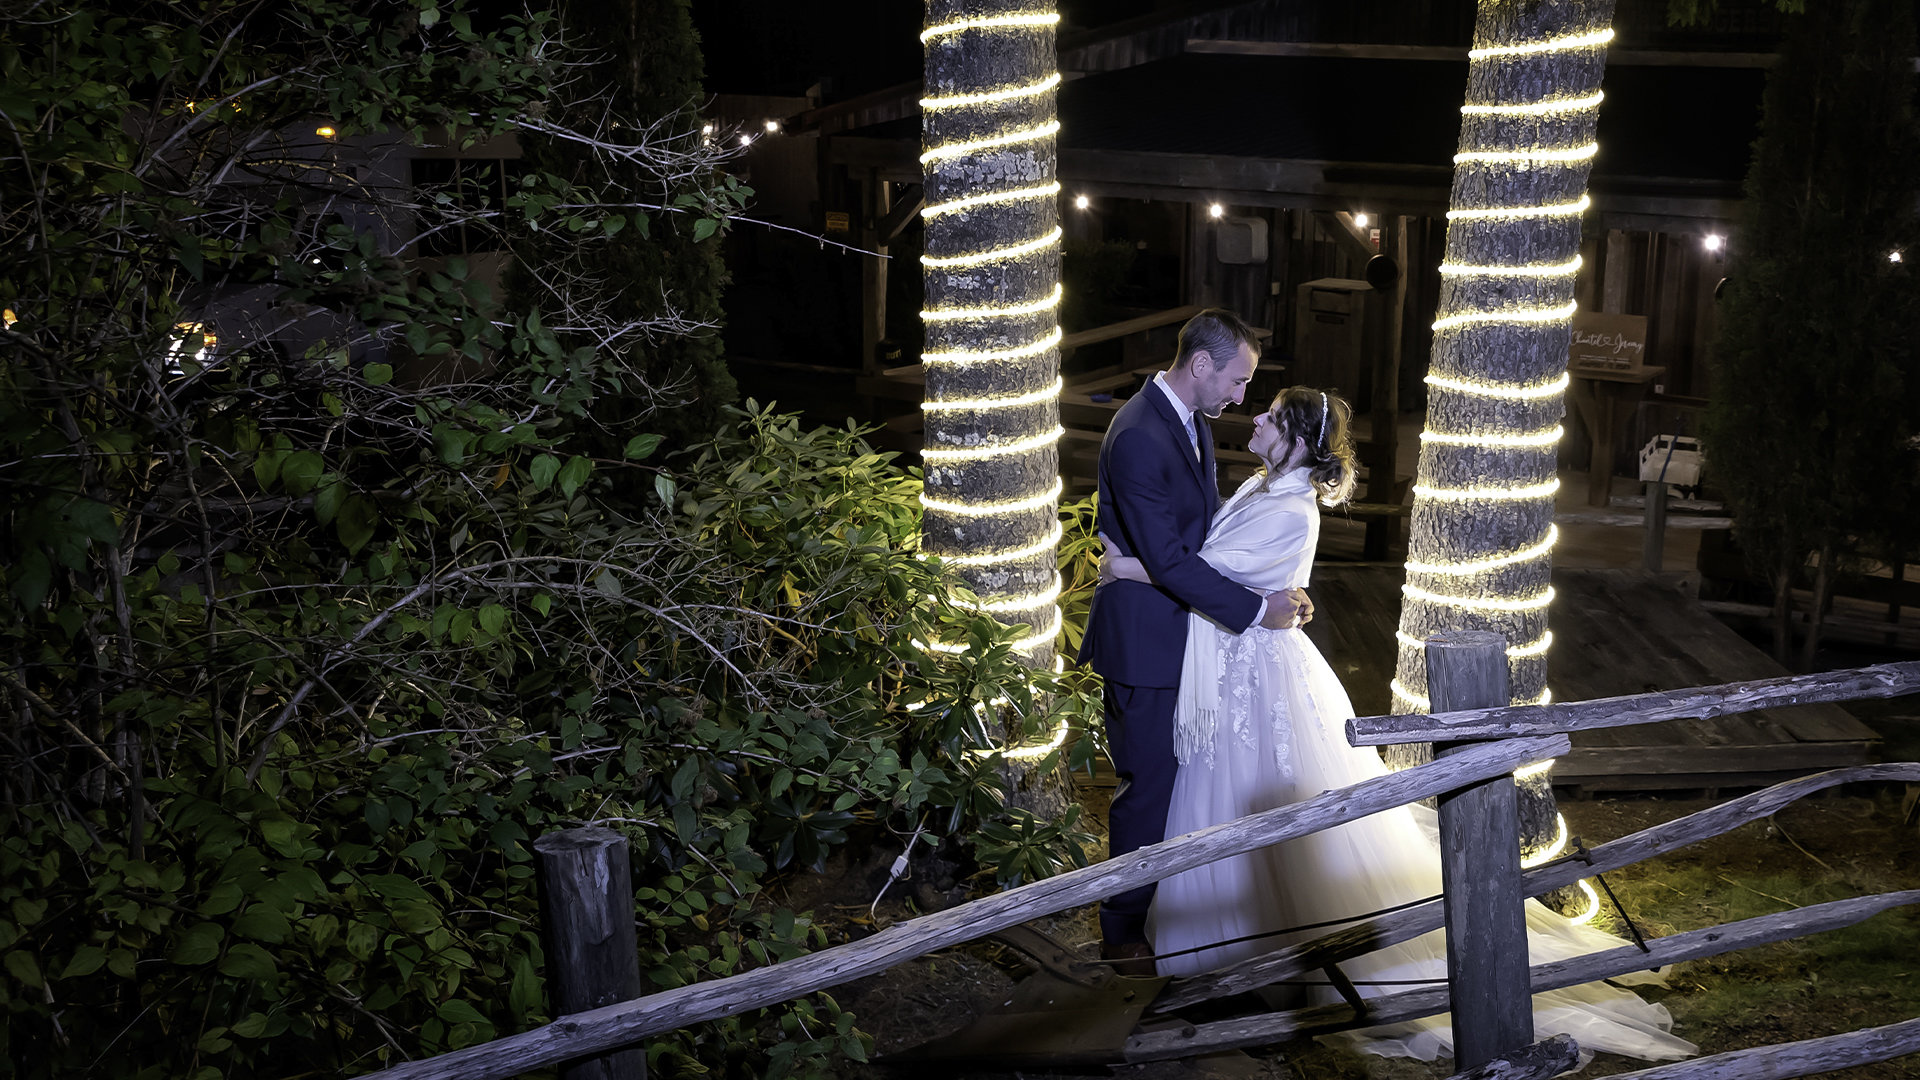 A bride and groom pose in front of trees wrapped in twinkle lights at the Hatfield Farm in Nova Scotia.